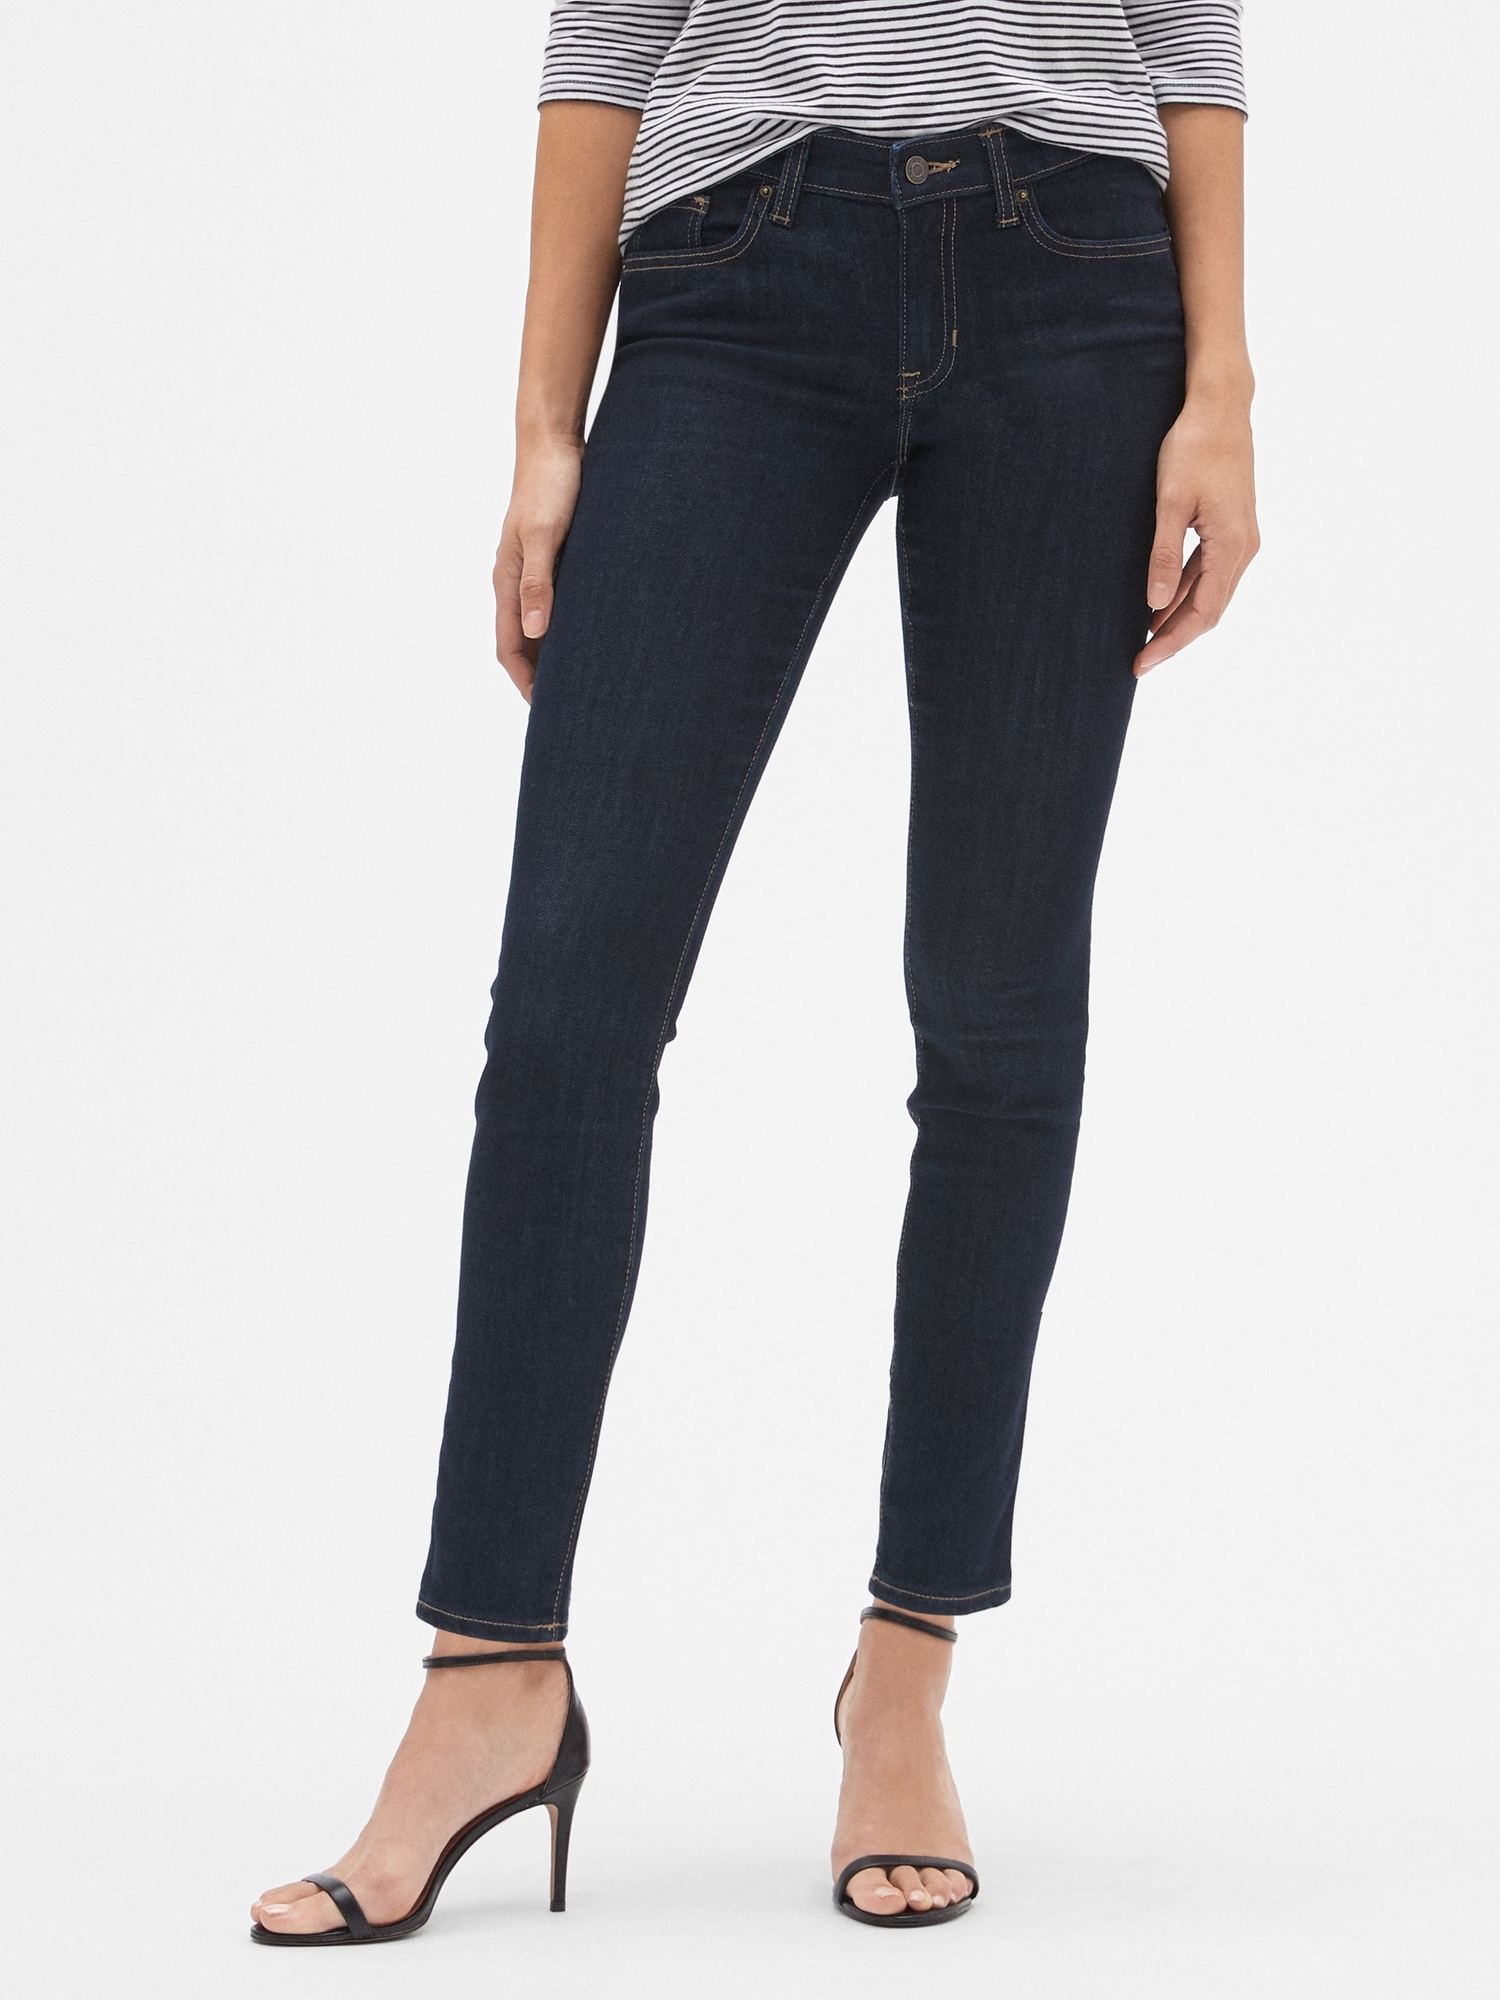 Mid Rise Legging Jeans with Washwell™ | Gap Factory